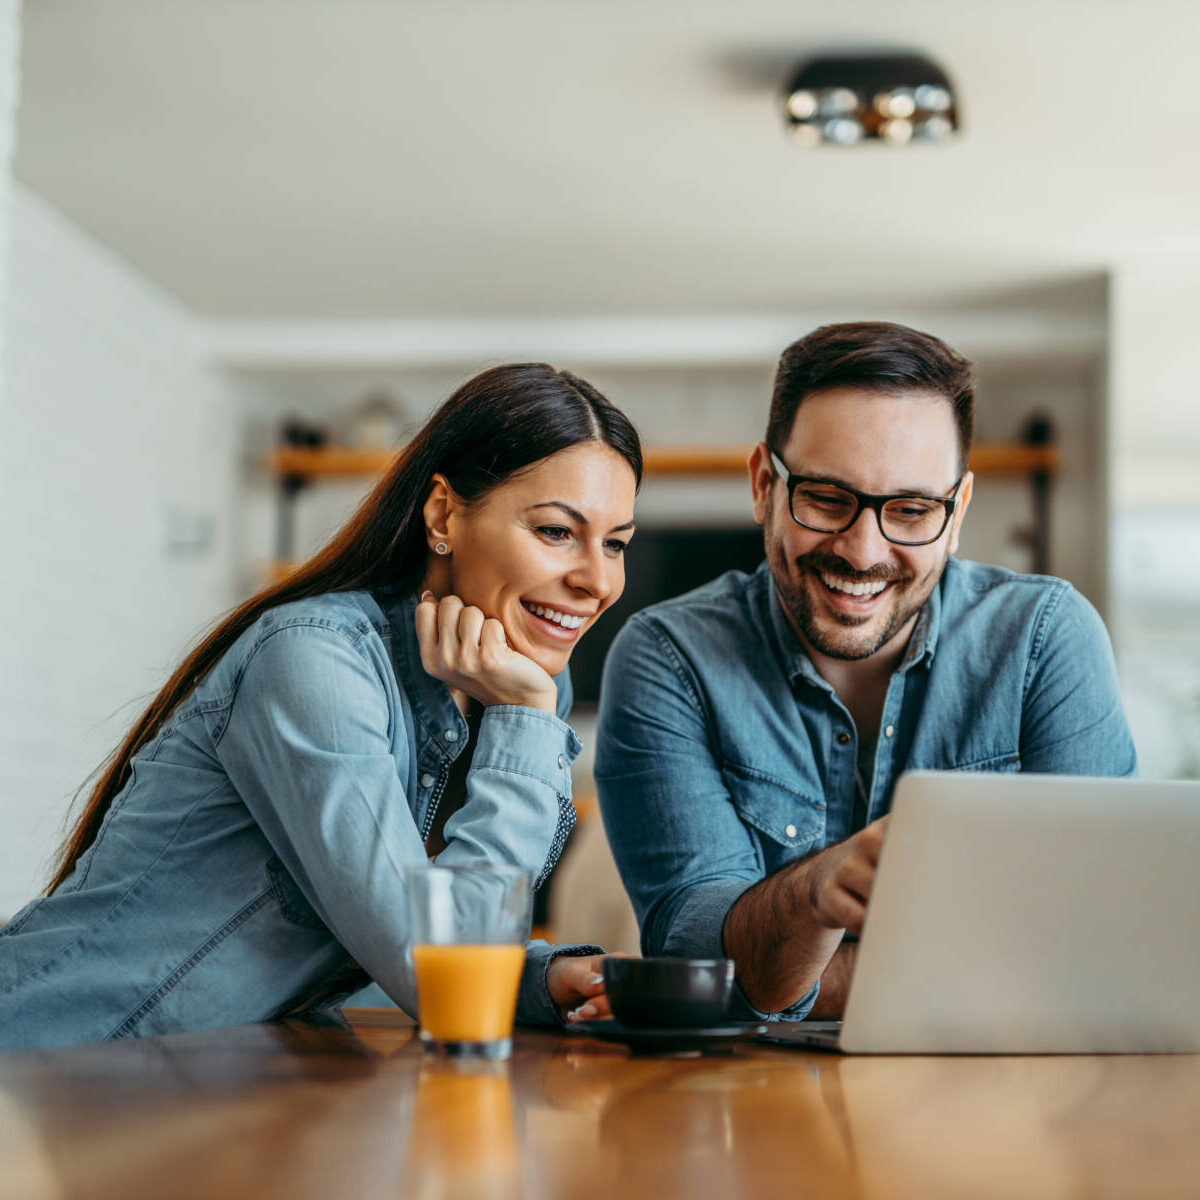 Portrait of a cute smiling couple looking at laptop together at home.